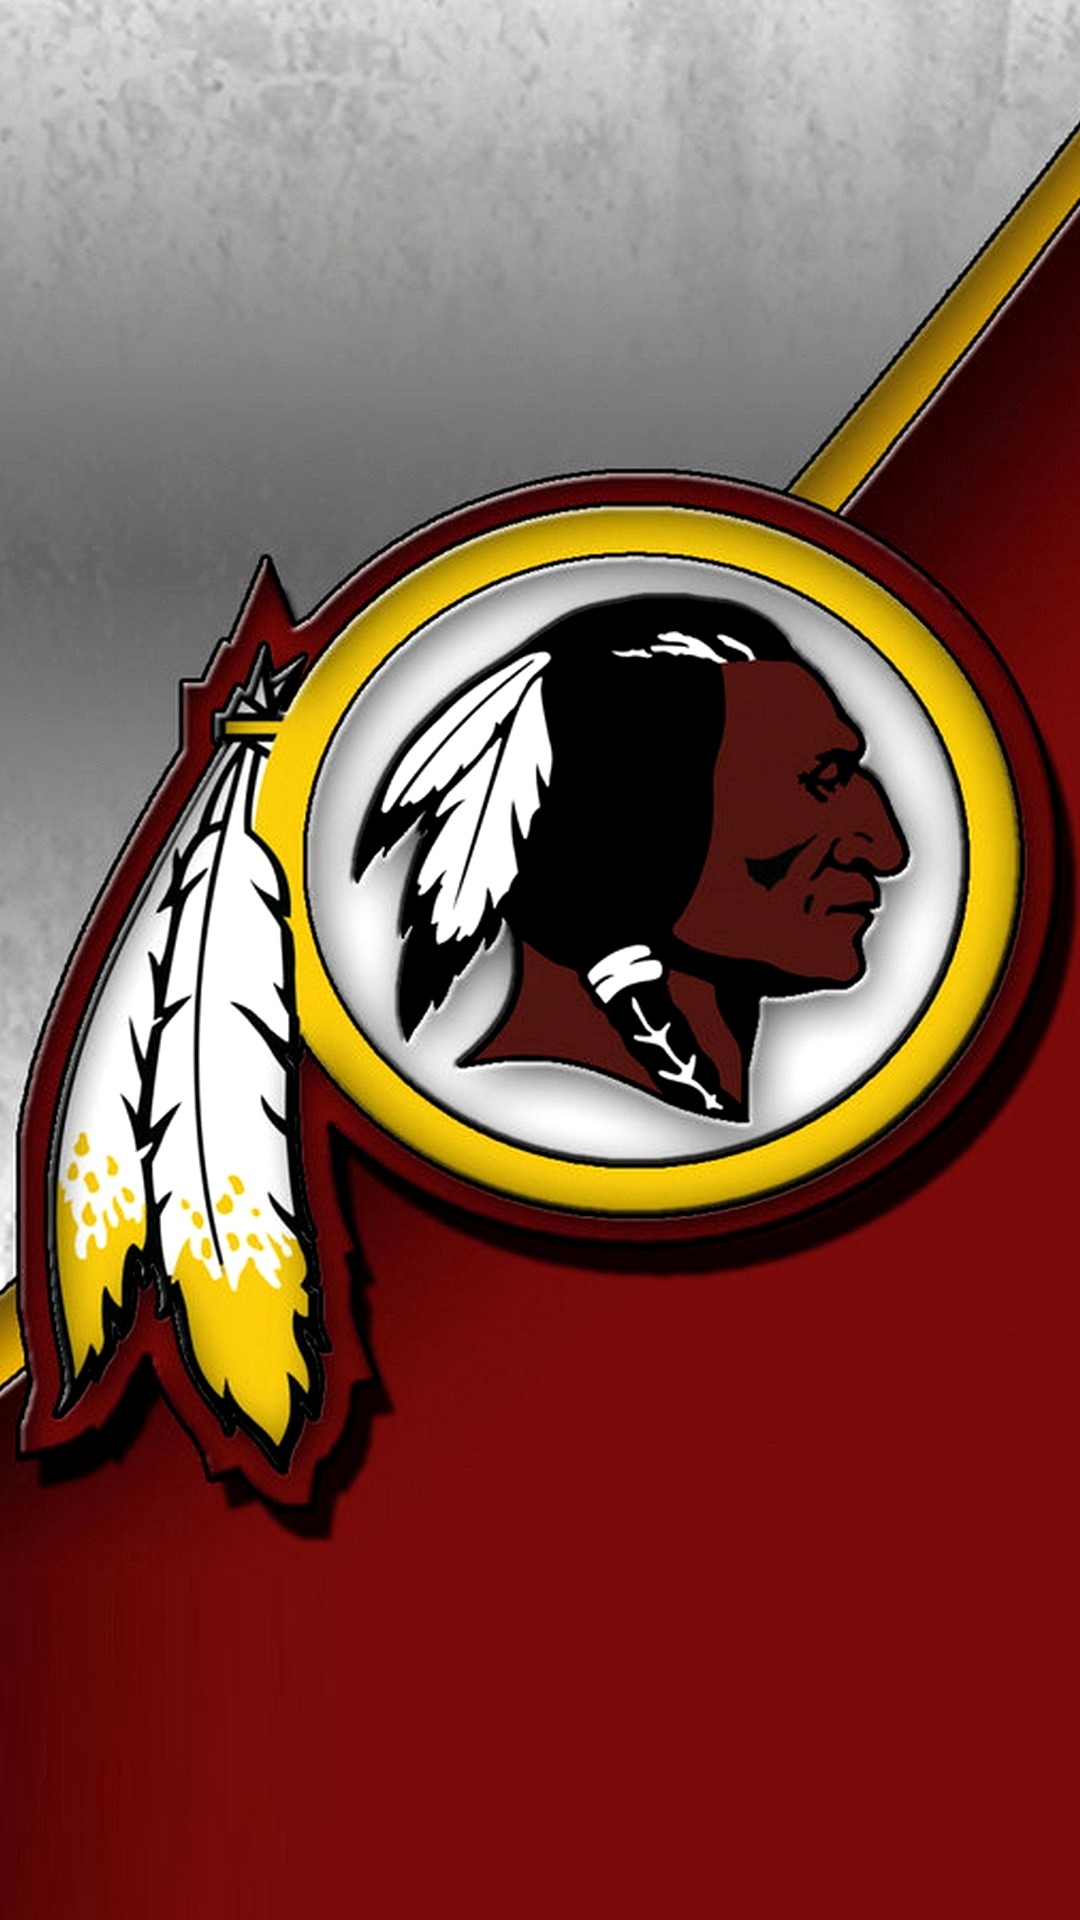 Washington Redskins Wallpaper For Mobile with high-resolution 1080x1920 pixel. You can use and set as wallpaper for Notebook Screensavers, Mac Wallpapers, Mobile Home Screen, iPhone or Android Phones Lock Screen